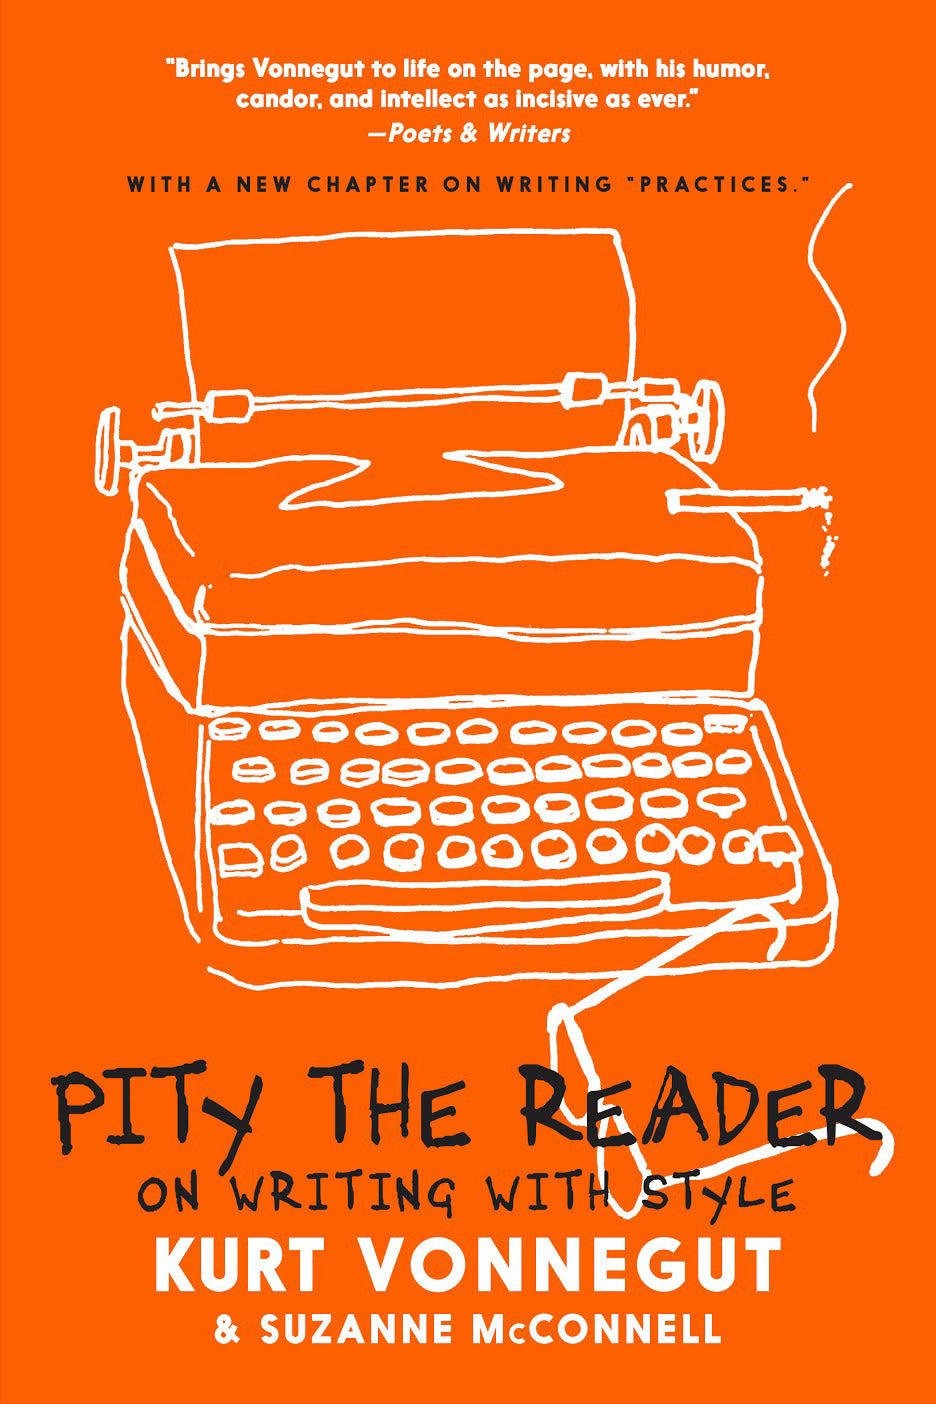 Pity the Reader